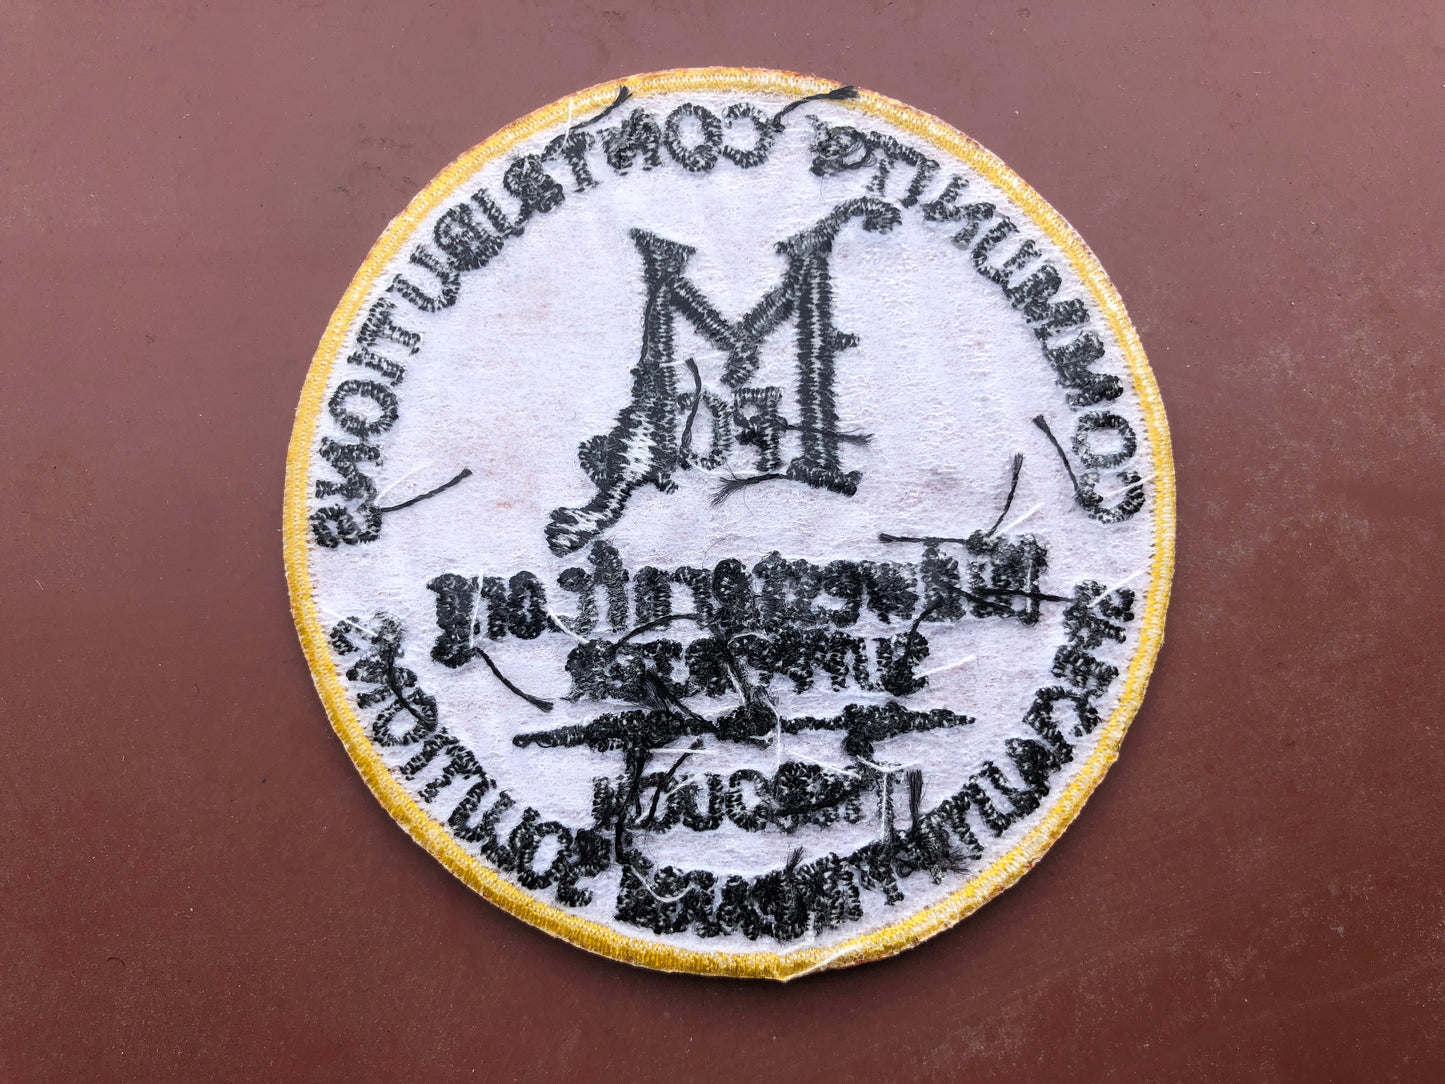 MFC 'Supporter' patches: Embroidered, iron-on patches.